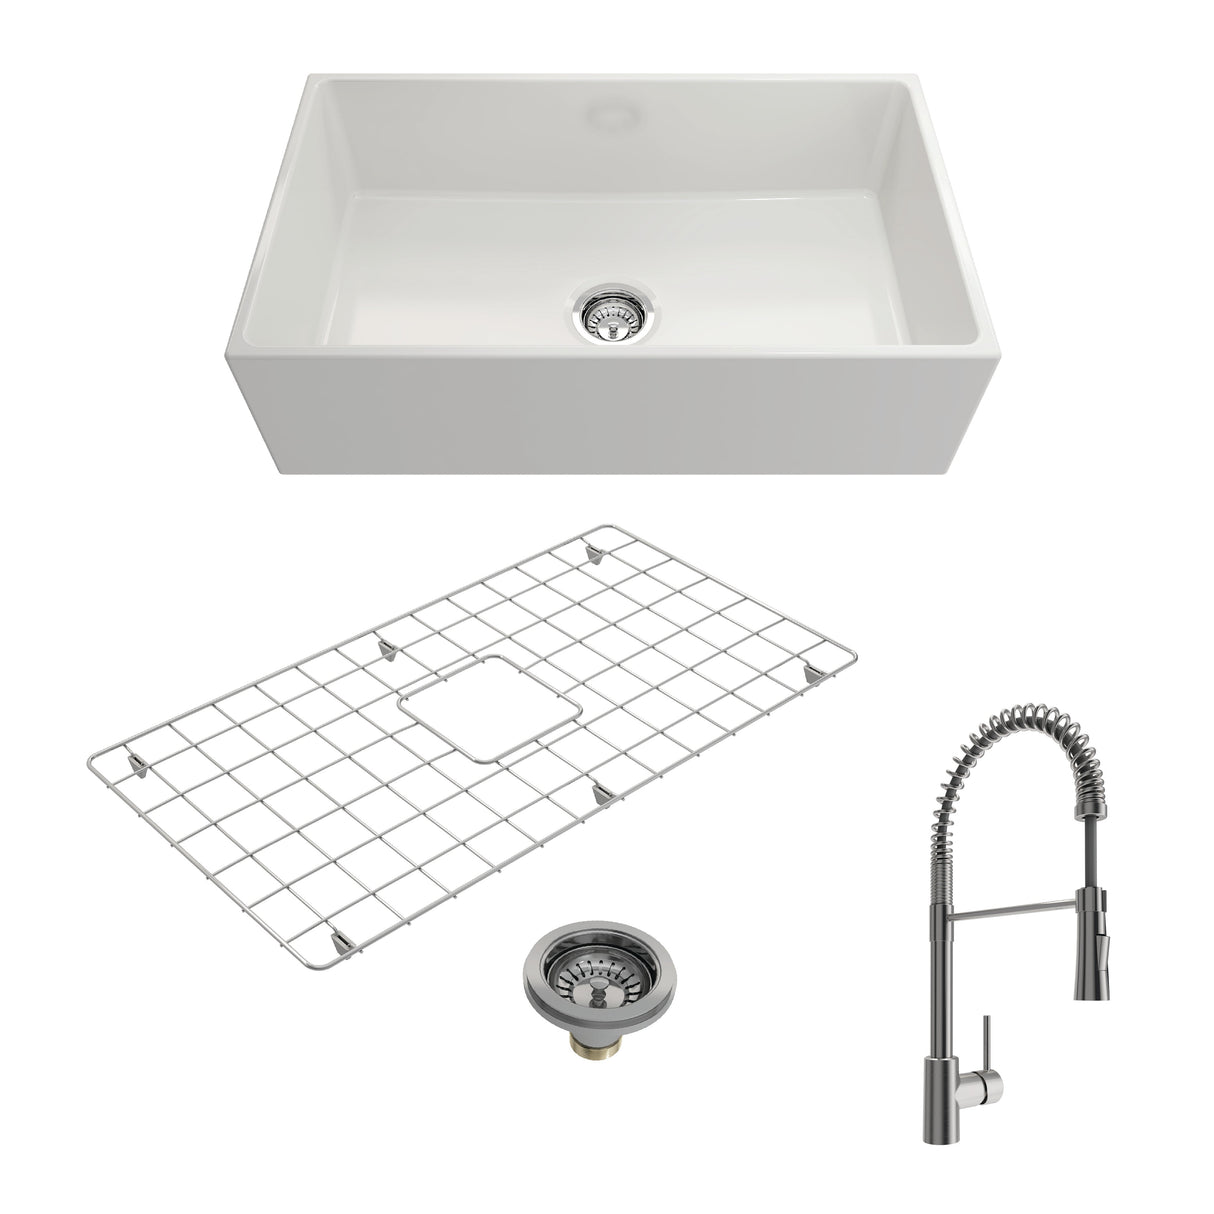 BOCCHI 1352-001-2020SS Kit: 1352 Contempo Apron Front Fireclay 33 in. Single Bowl Kitchen Sink with Protective Bottom Grid and Strainer w/ Livenza 2.0 Faucet